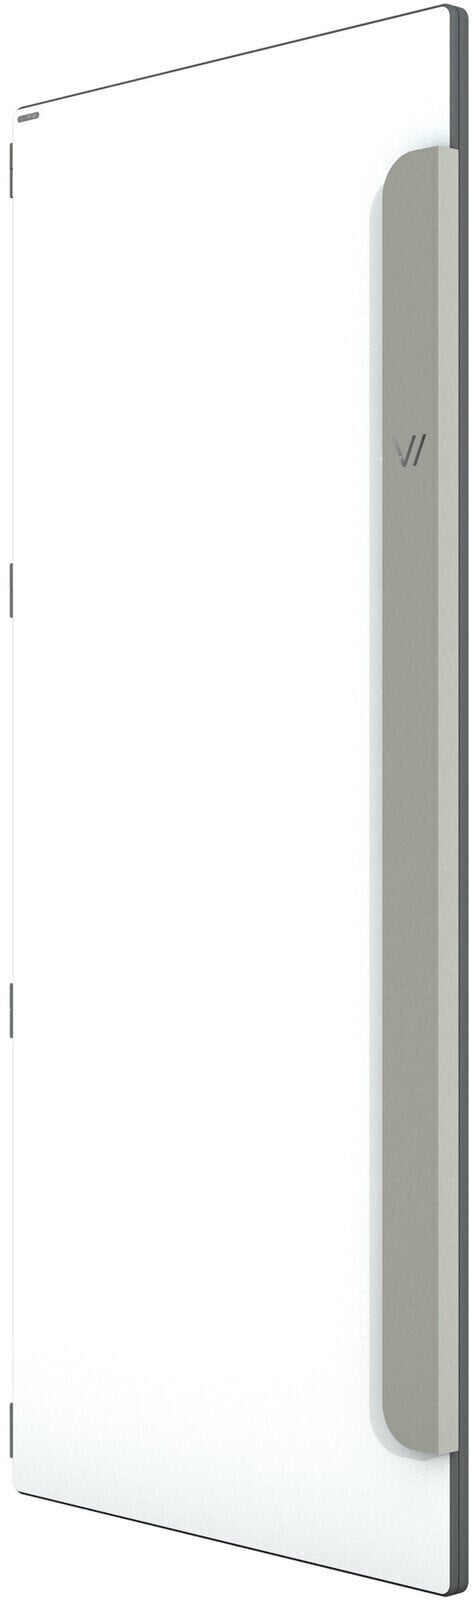 Portable acoustic panel Vicoustic VicBooth Ultra Flat Door White Mate White (Damaged)